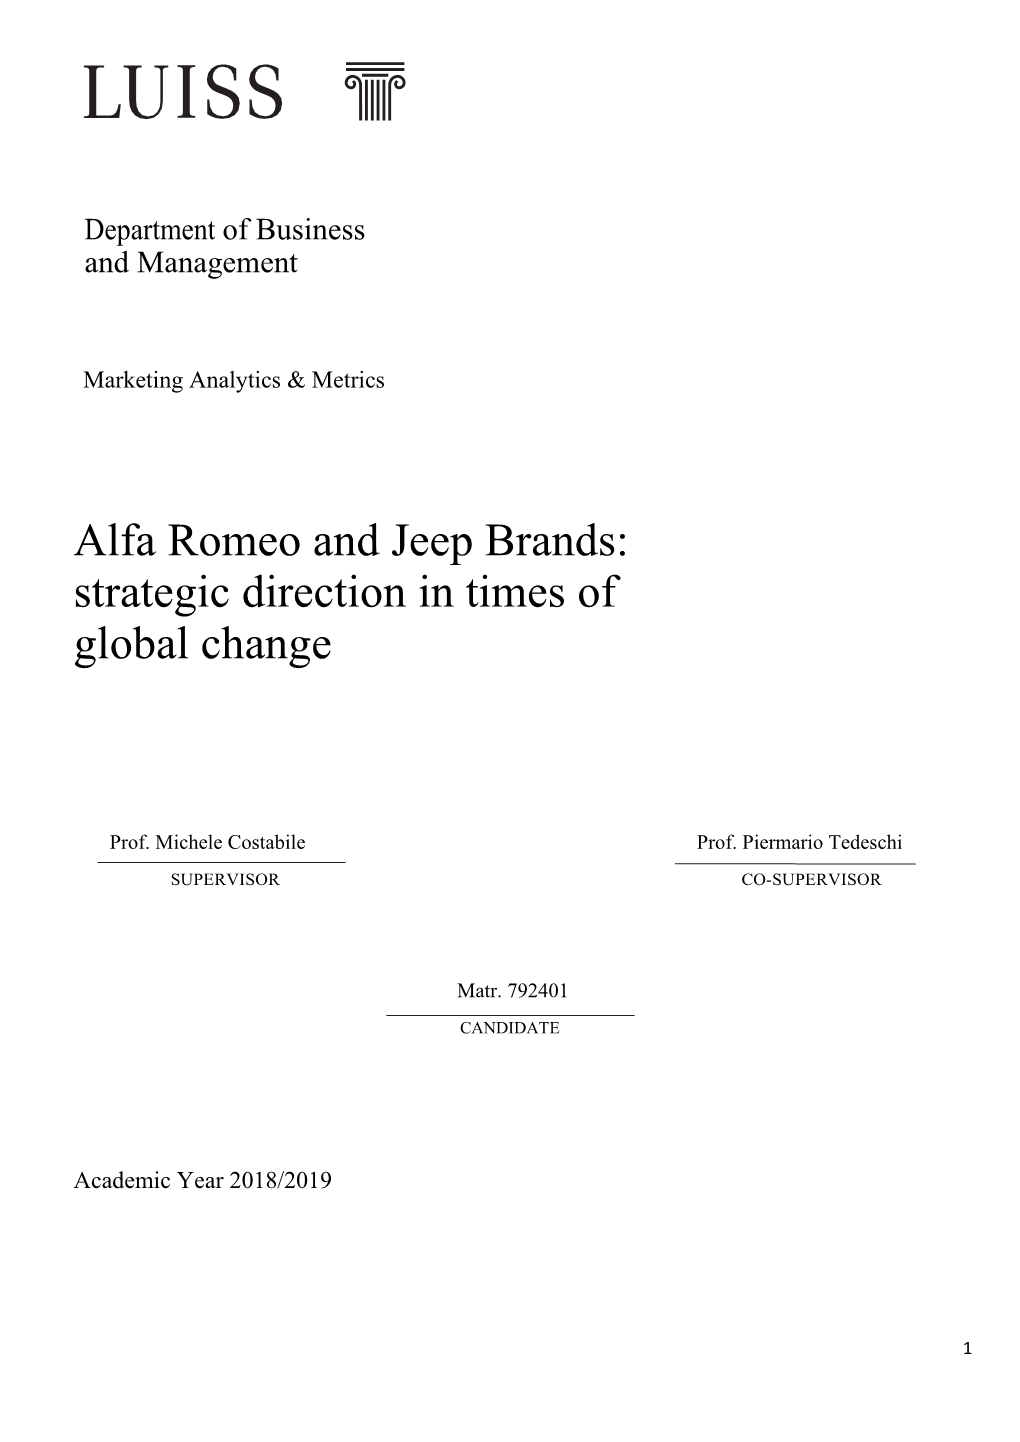 Alfa Romeo and Jeep Brands: Strategic Direction in Times of Global Change